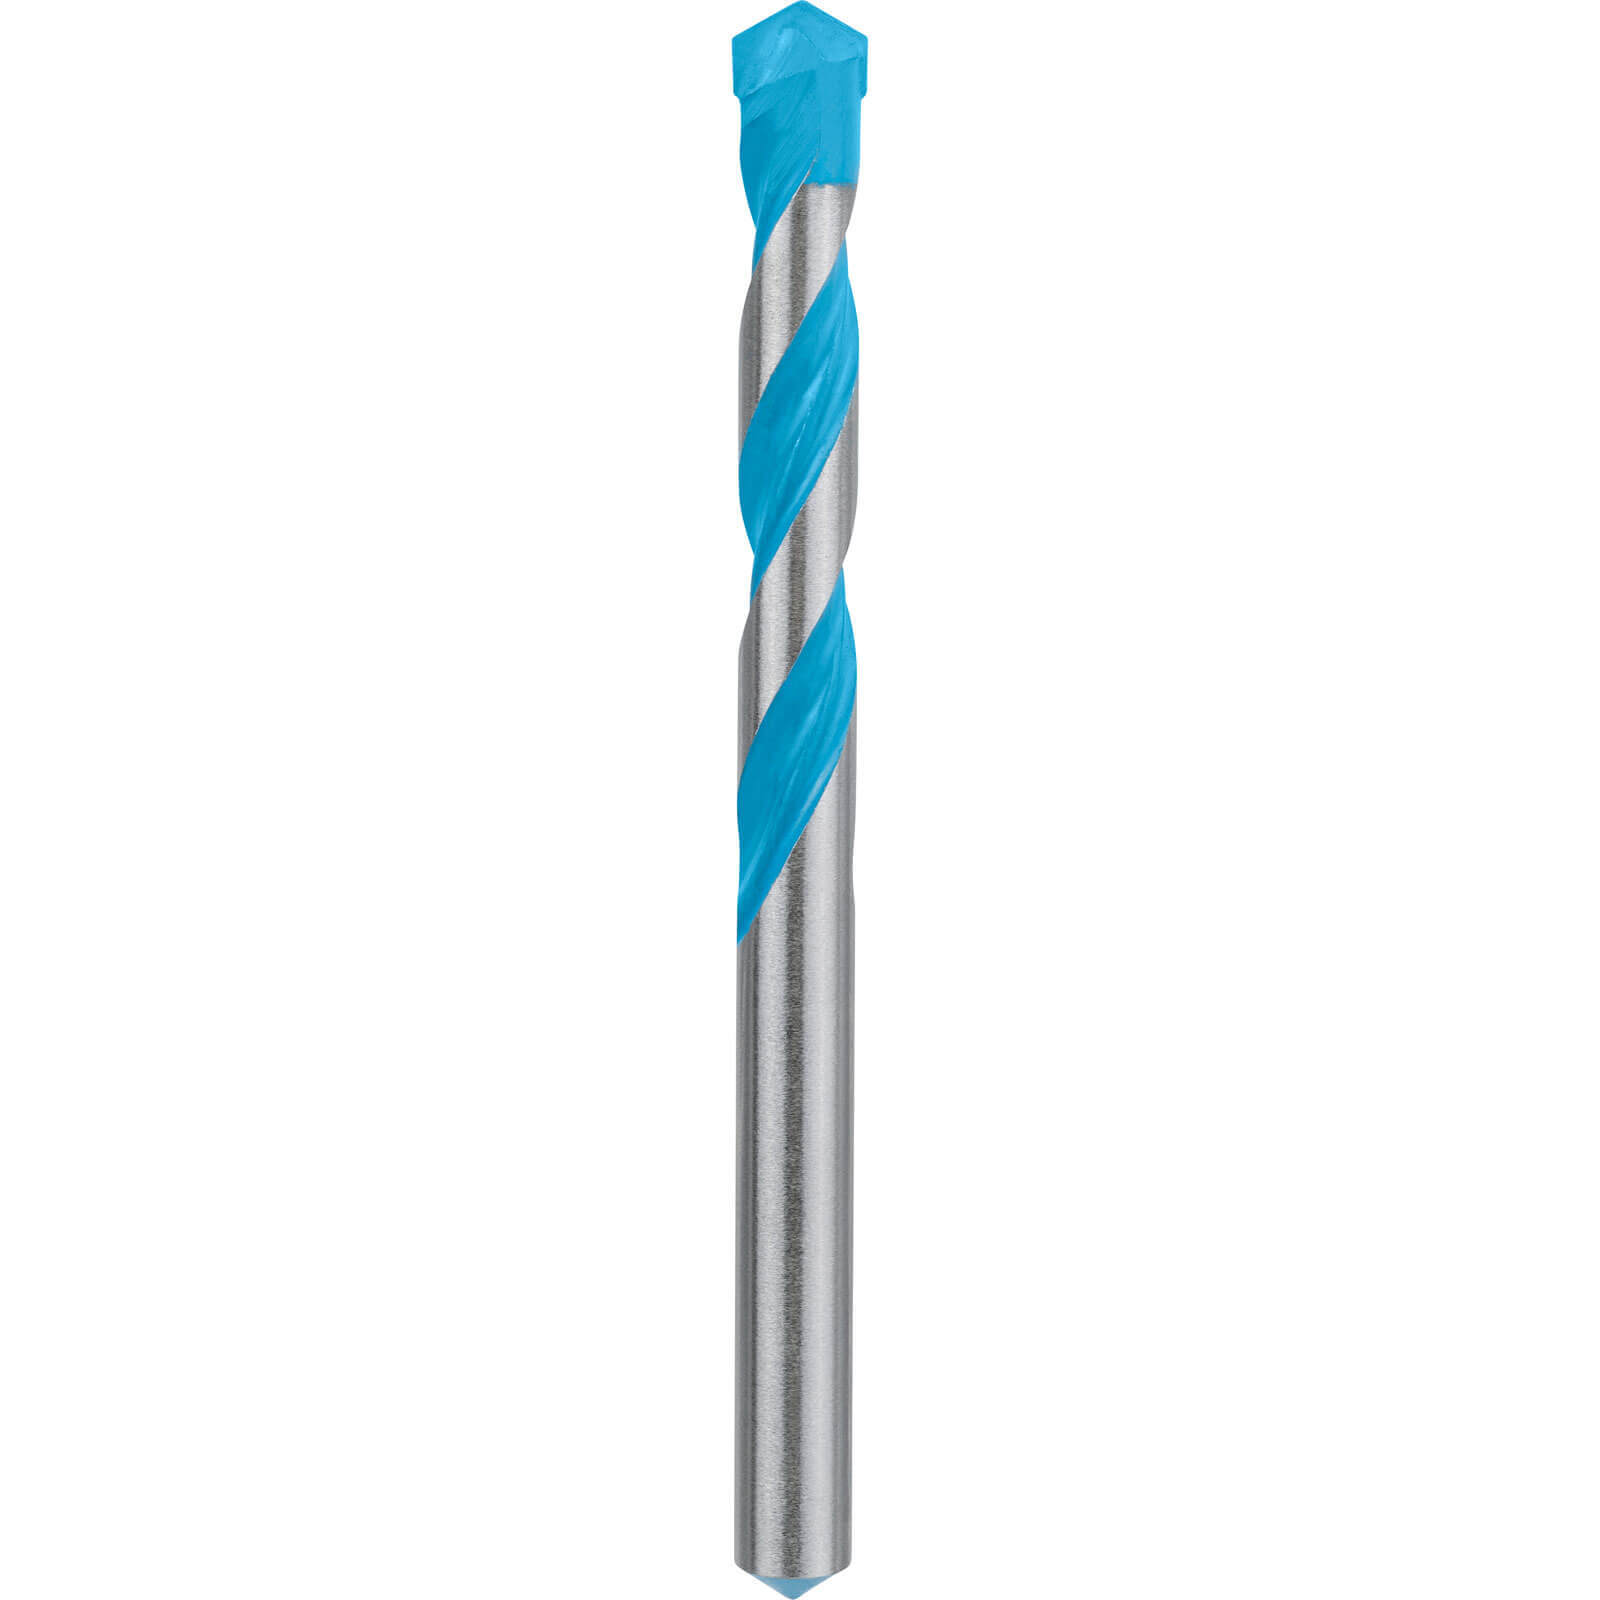 Image of Bosch Expert CYL-9 Multi Construction Drill Bit 10mm 120mm Pack of 8